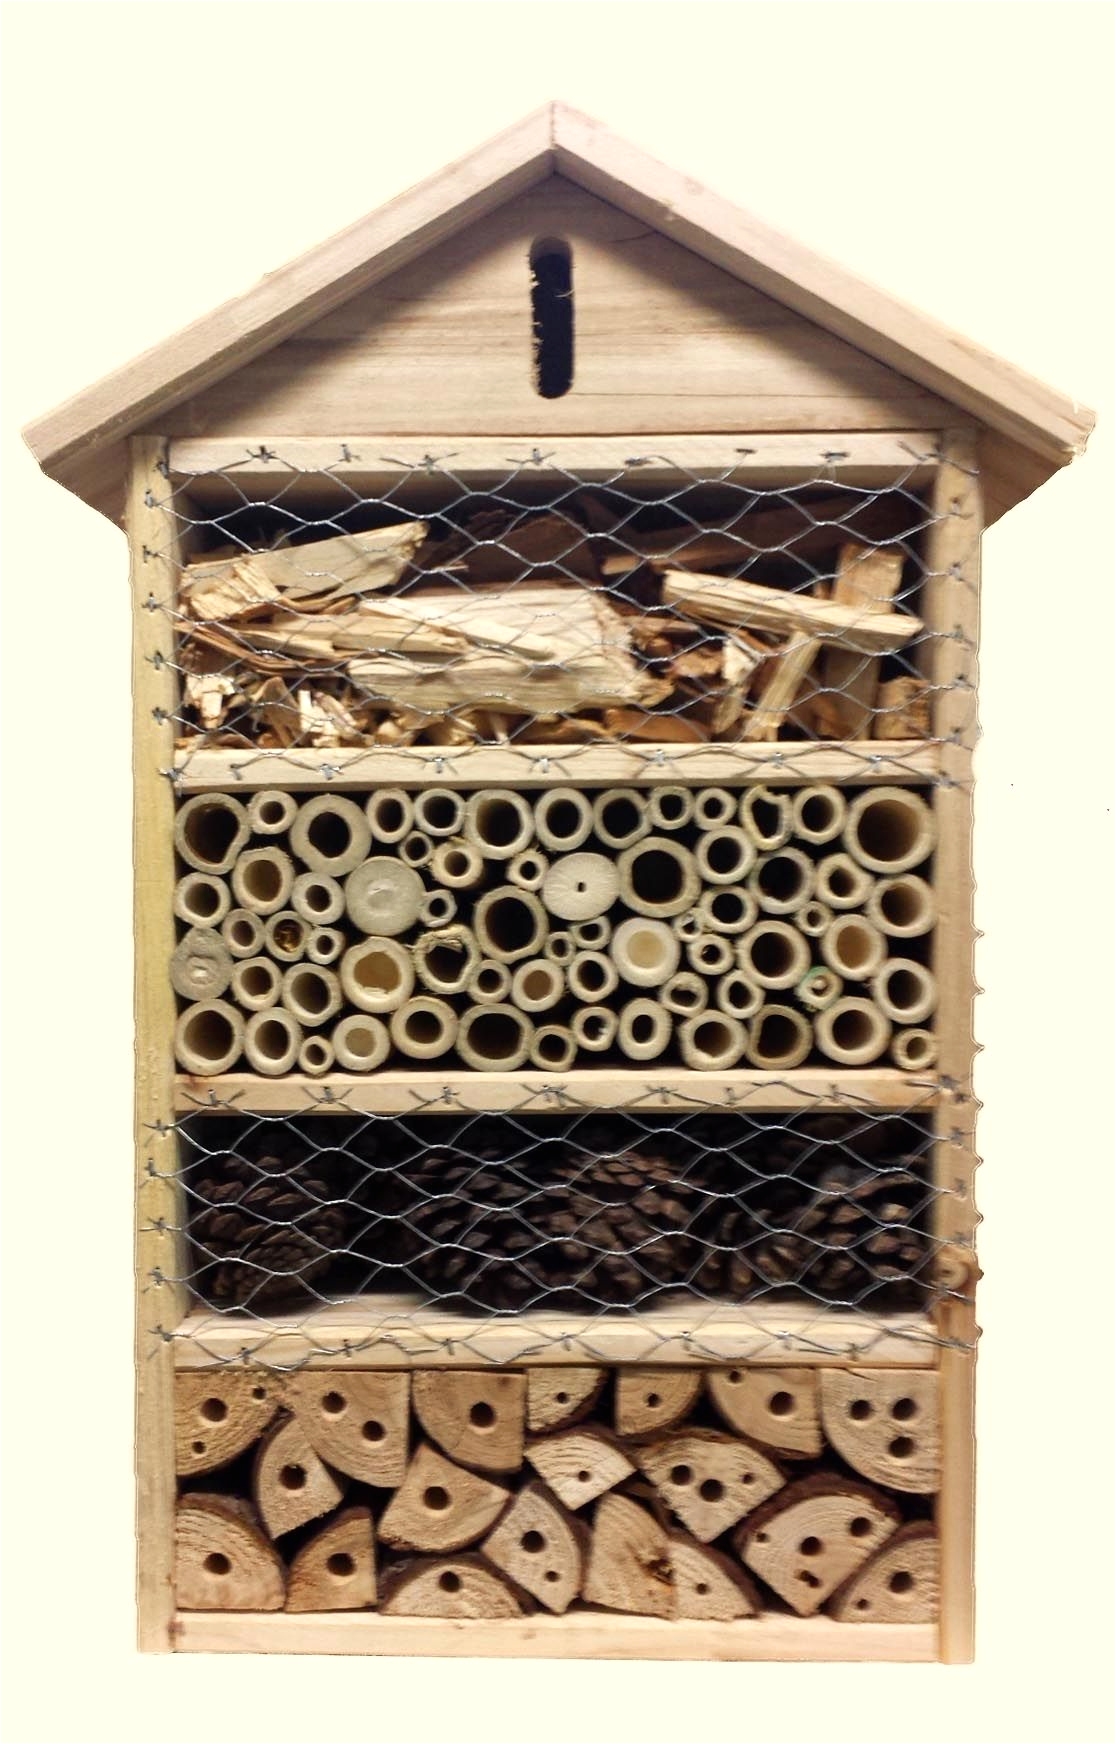 mason bee house plans solitary bee mason bee house the chicken wire deters birds from